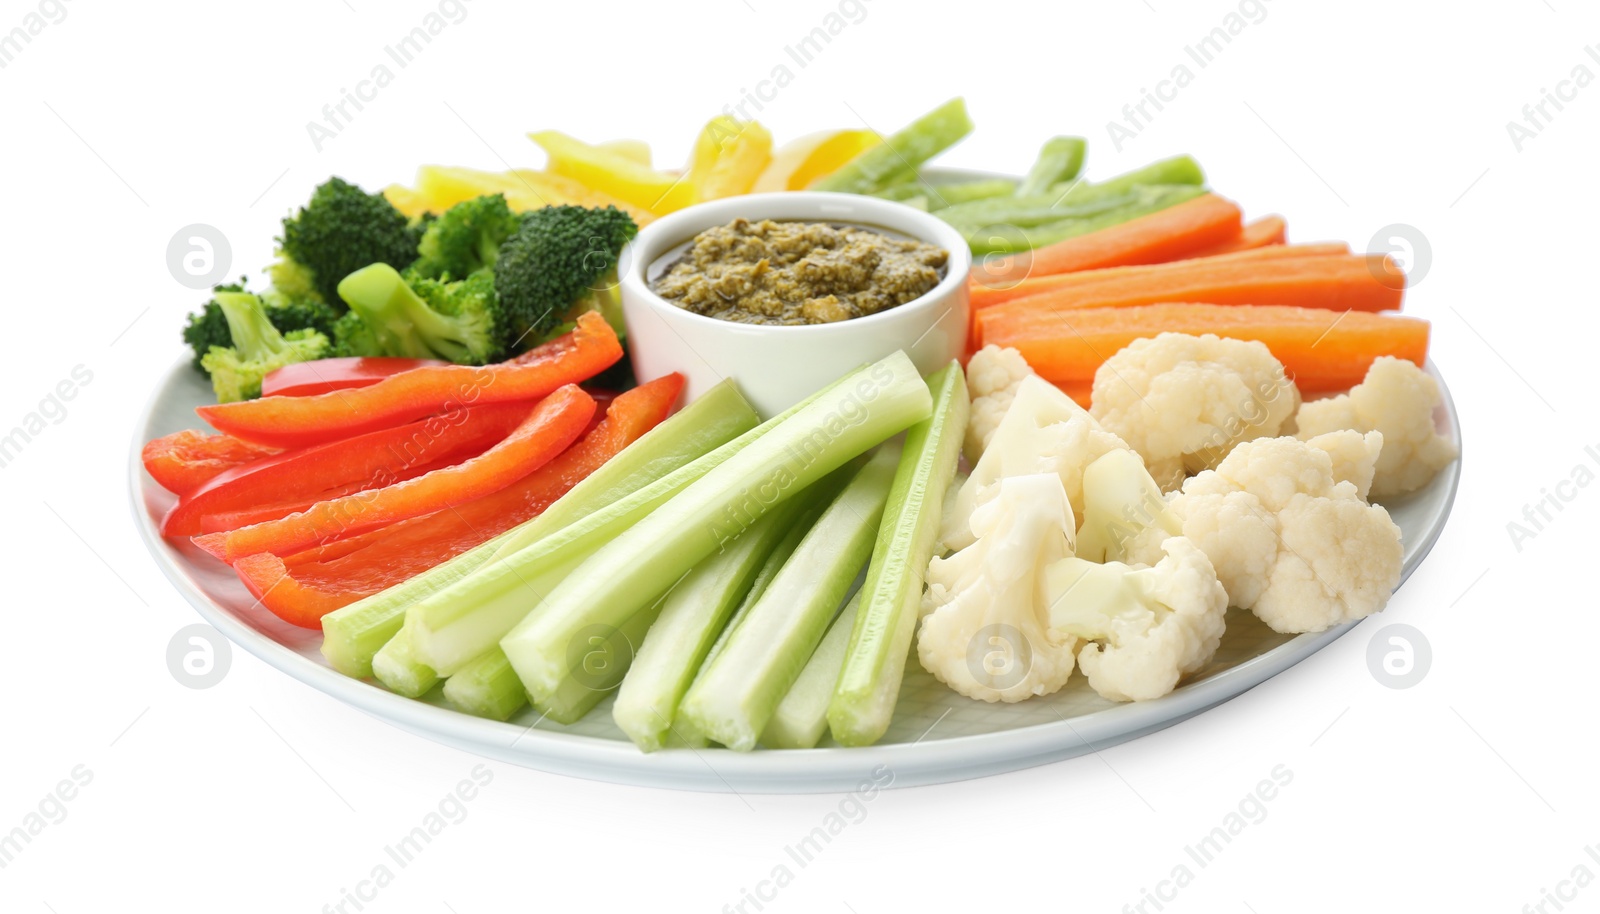 Photo of Plate with celery sticks, other vegetables and dip sauce isolated on white